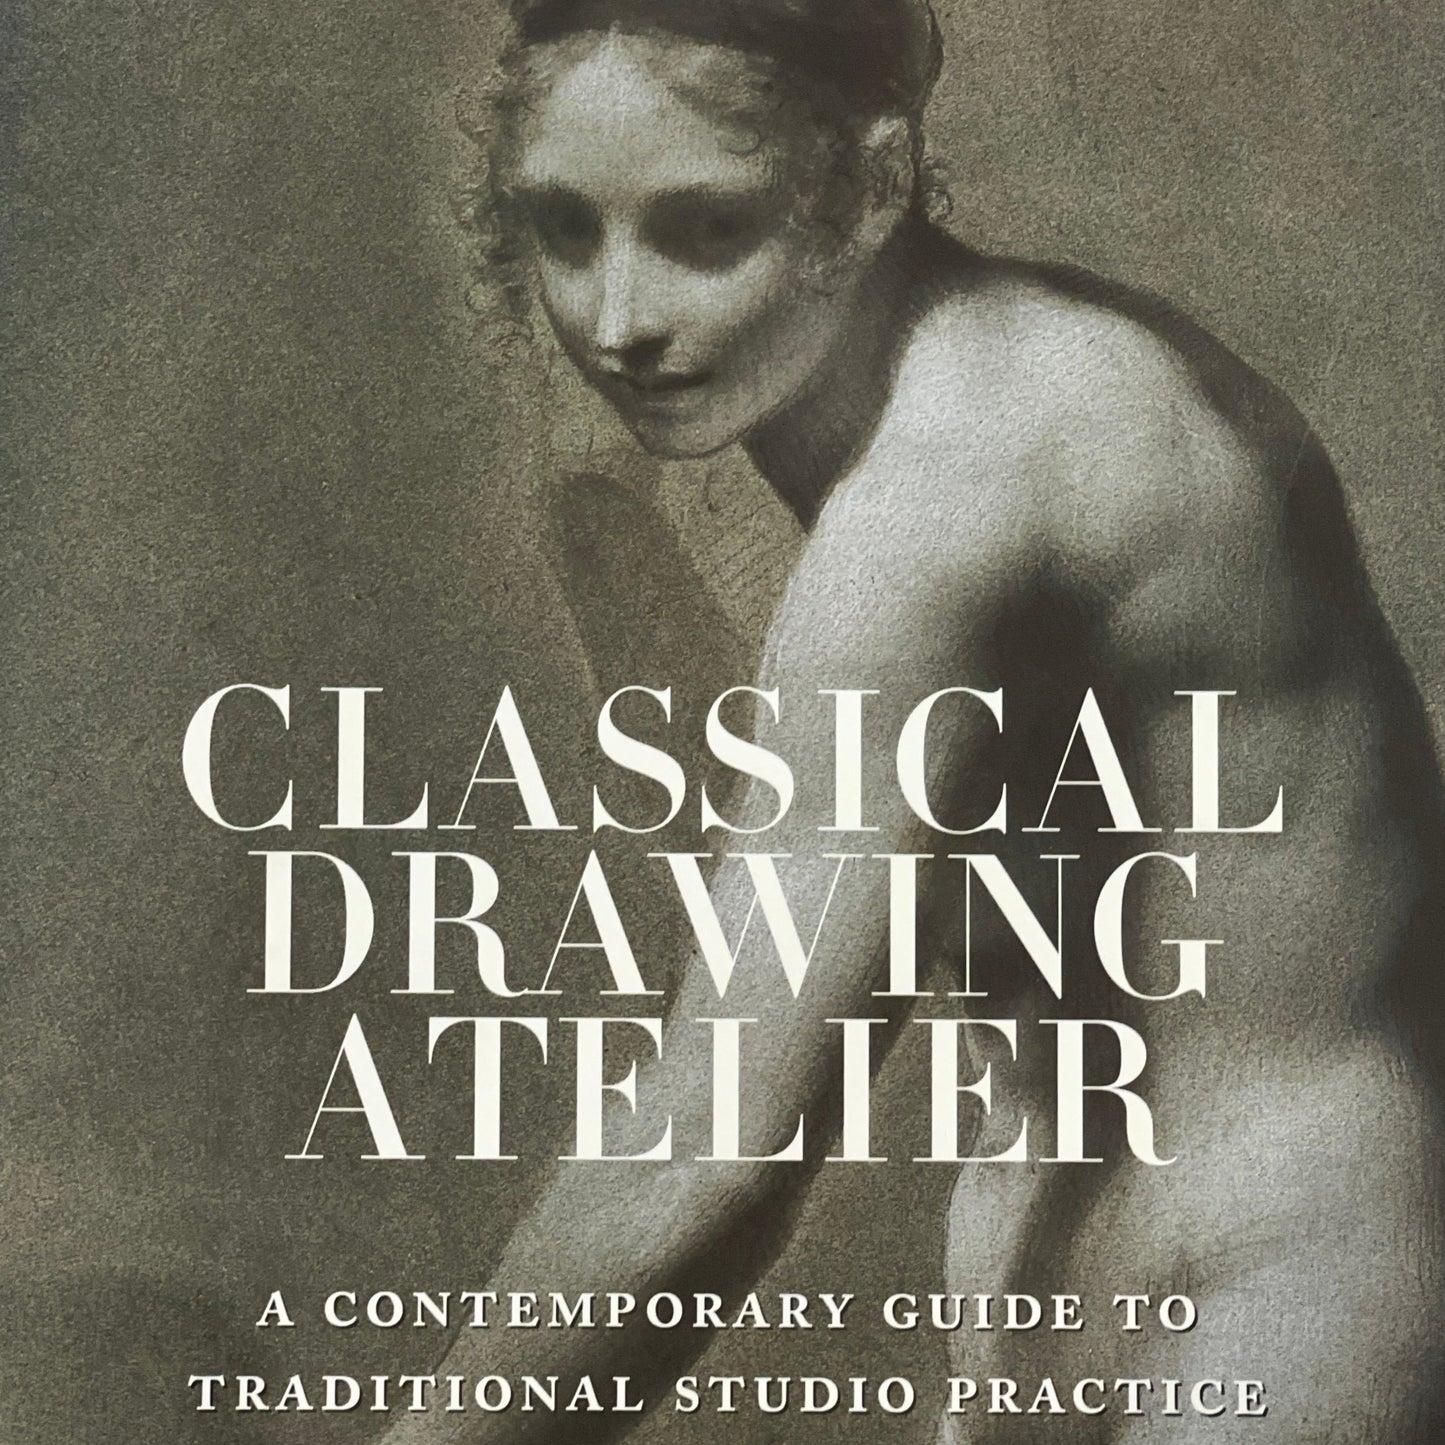 Aristides, Juliette "Classical Drawing Atelier: A Contemporary Guide to Traditional Studio Practice"